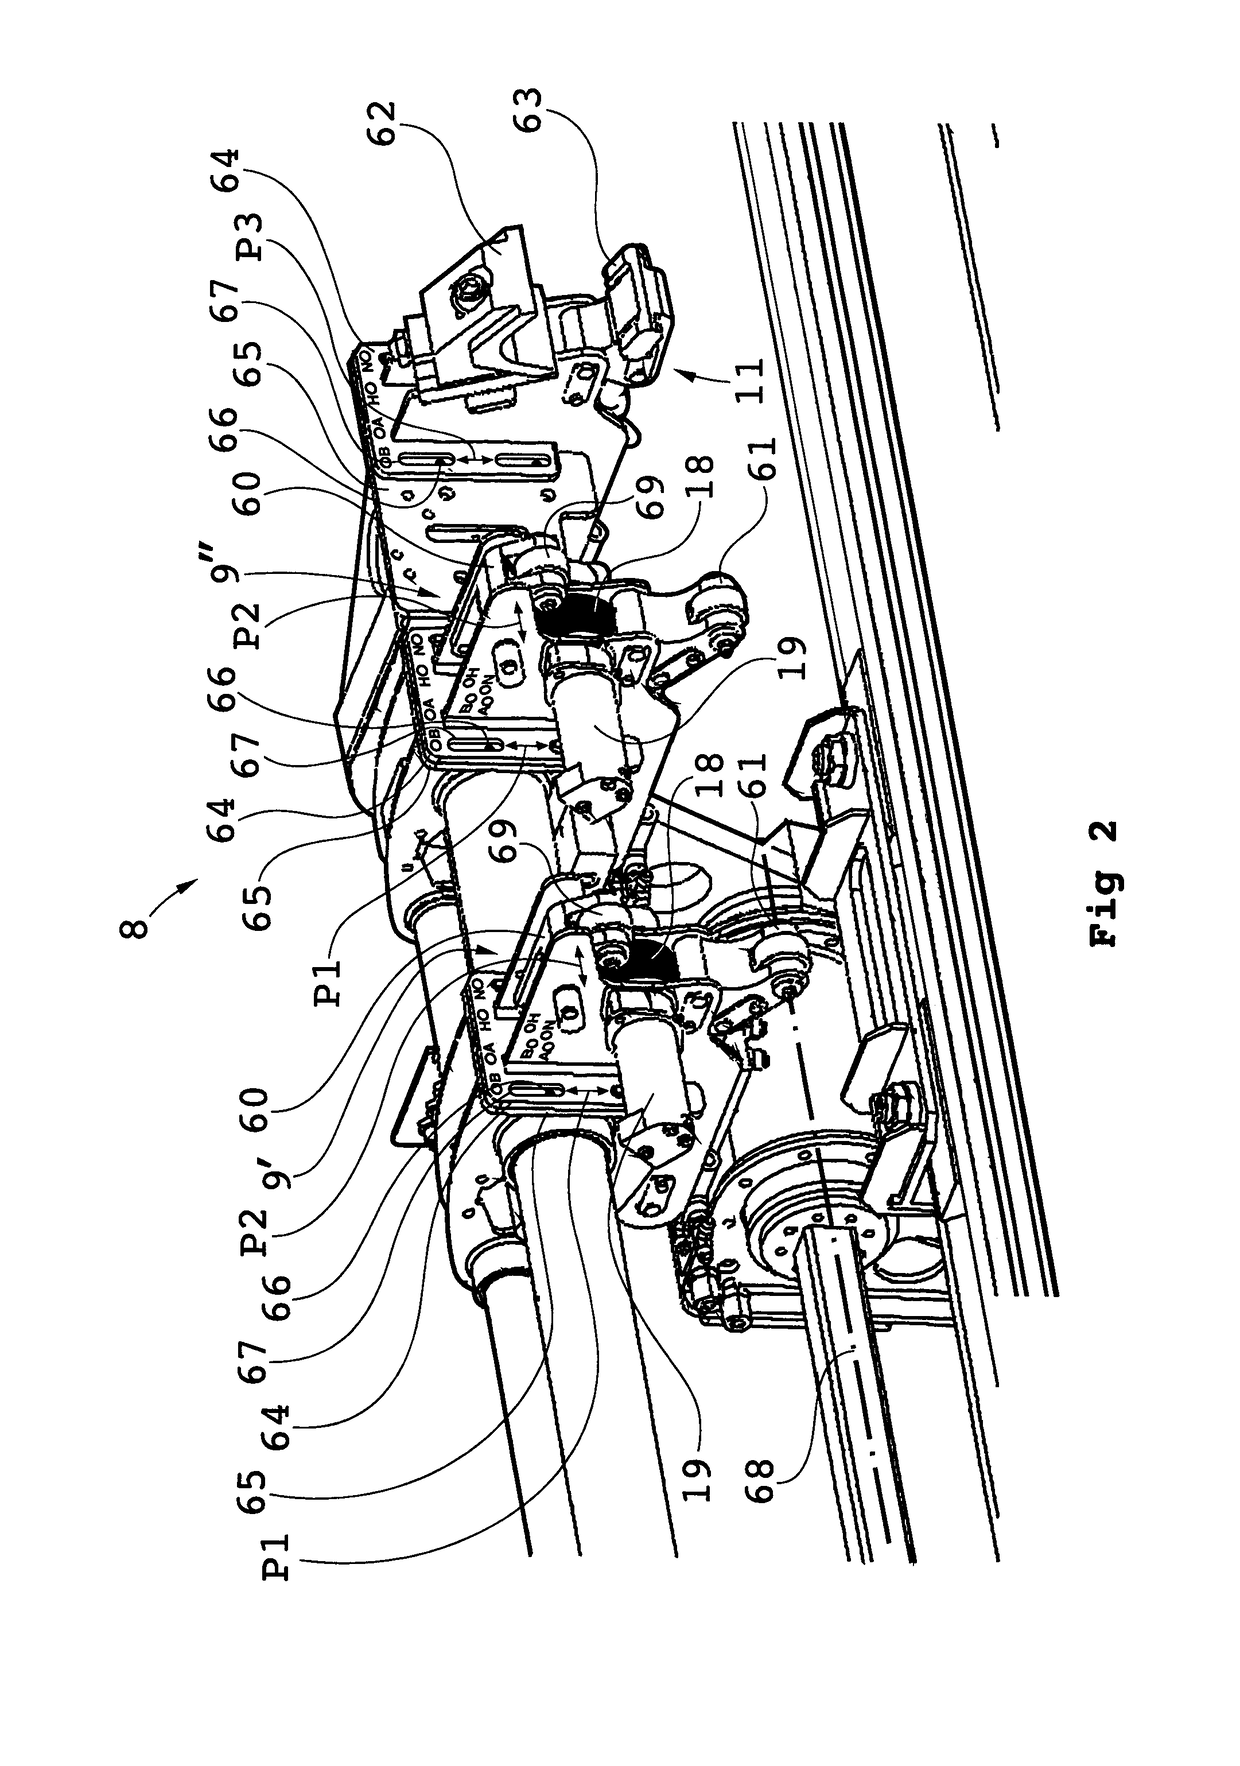 Device for handling drill string components with respect to a rock drill rig and a rock drill rig